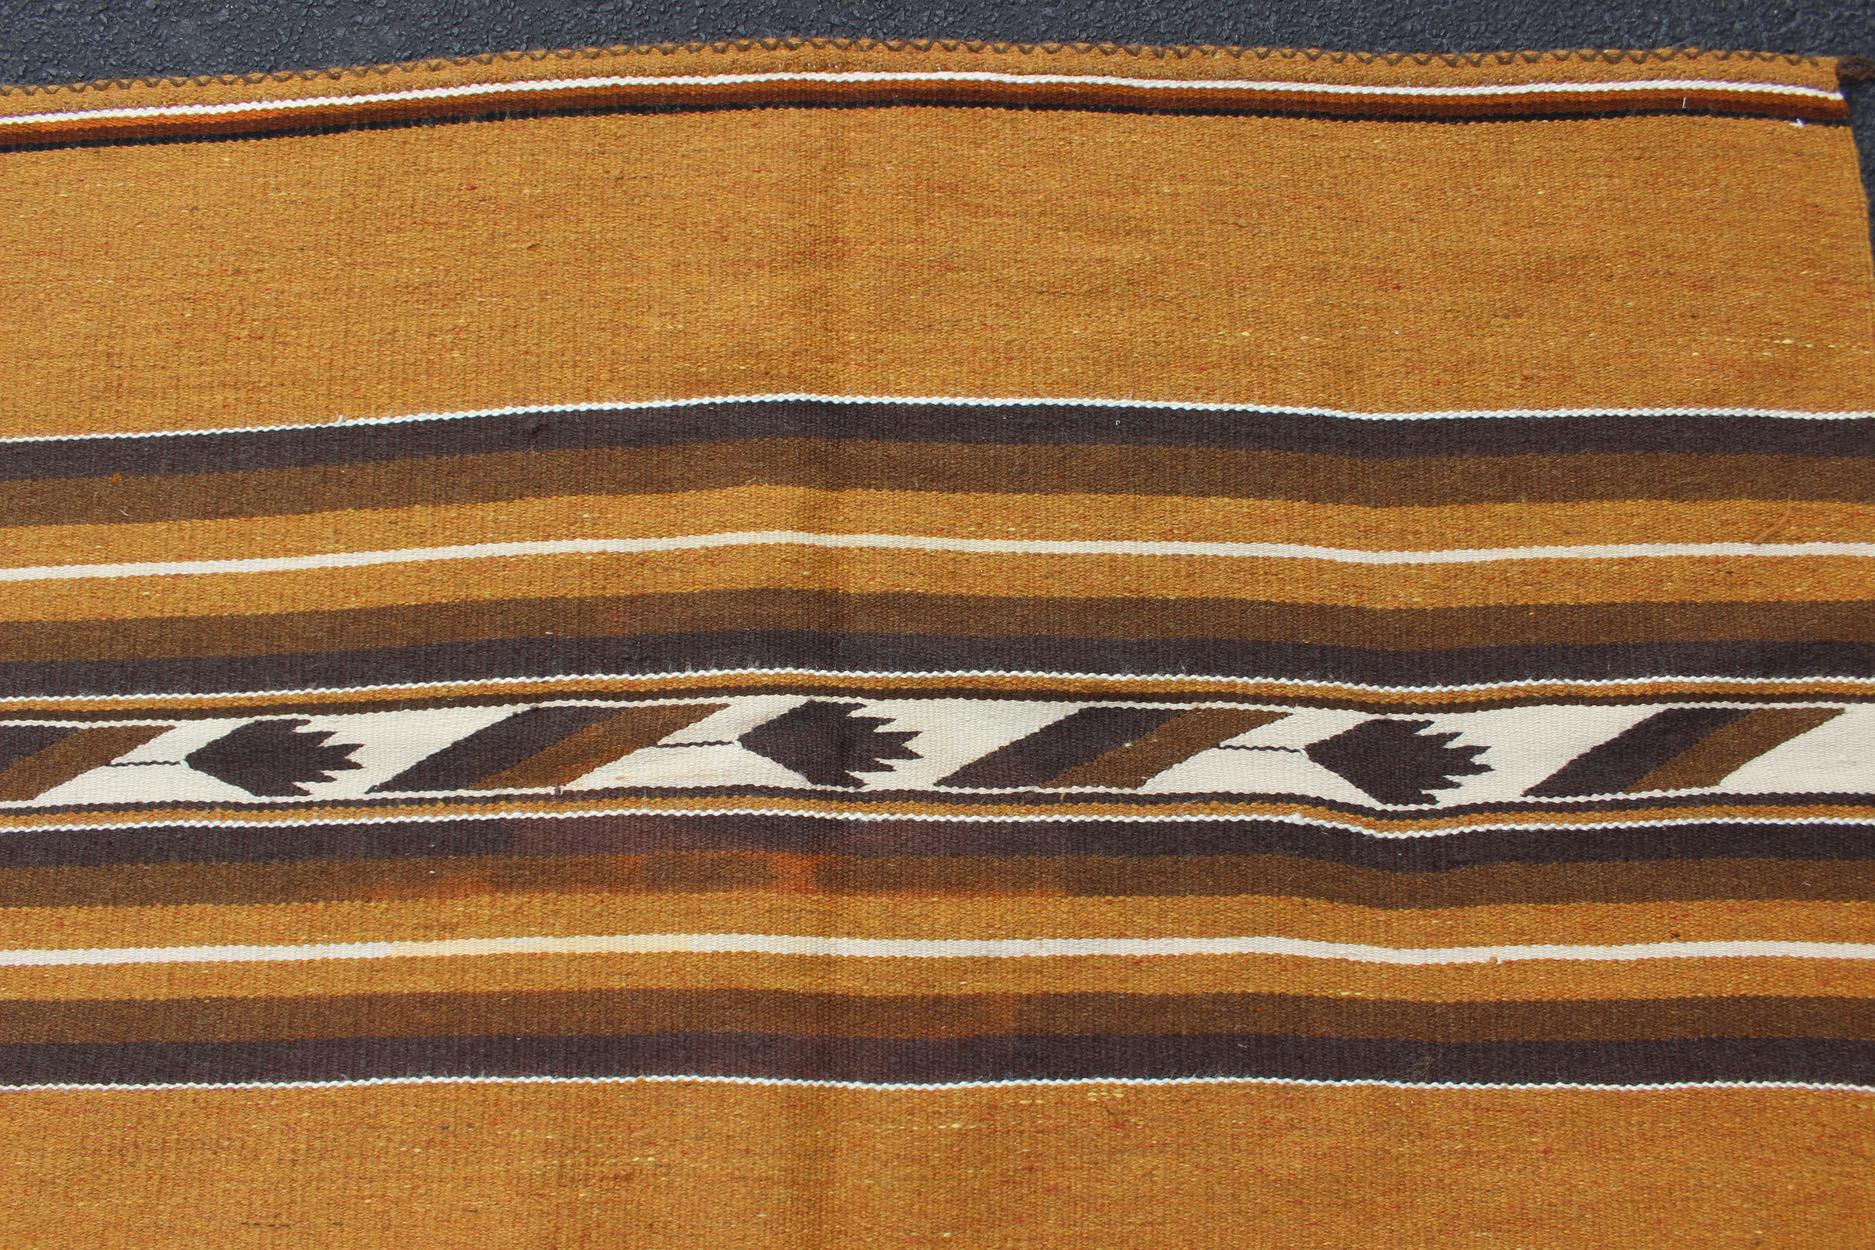 Vintage Navajo Kilim with Tribal Design in Earthy Tones For Sale 2